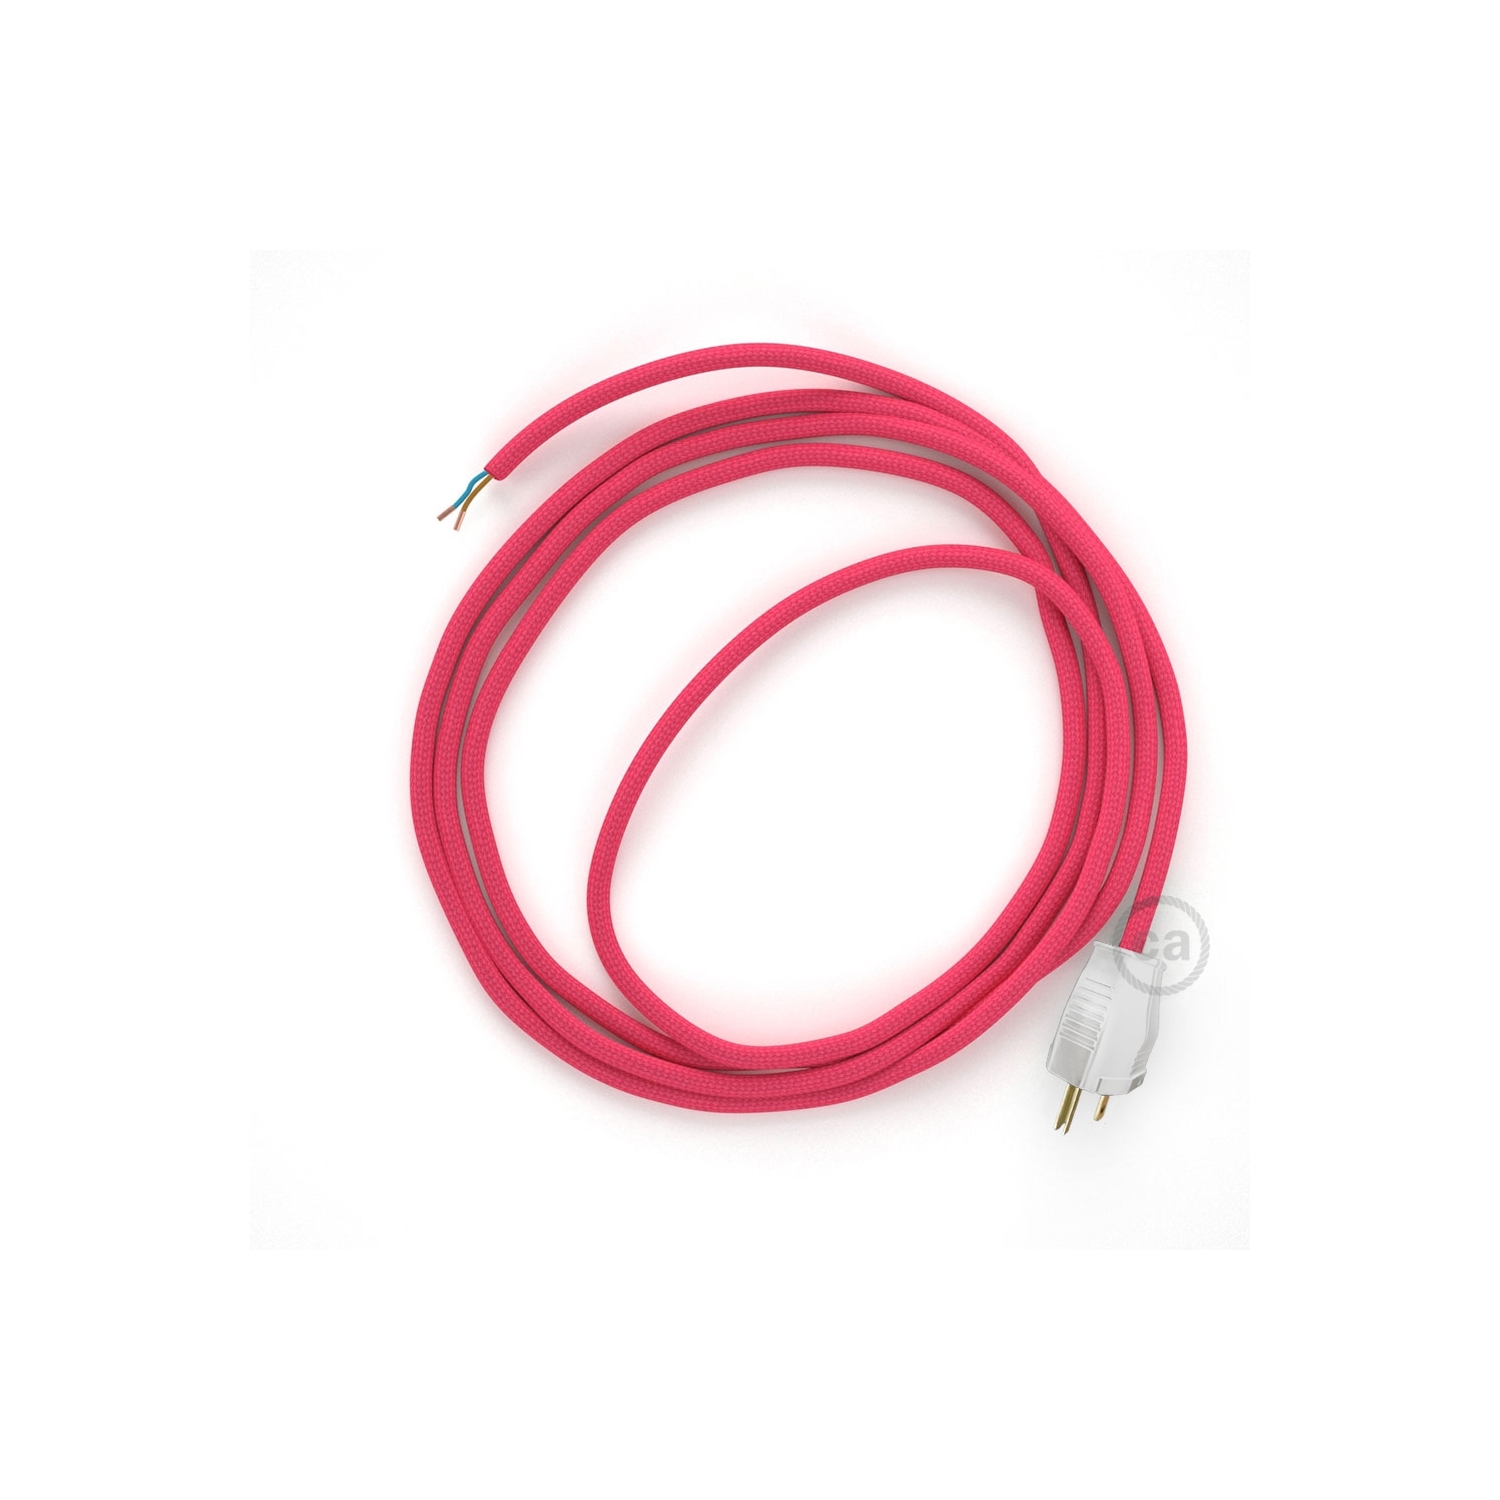 Cord-set - RM08 Fuchsia Rayon Covered Round Cable